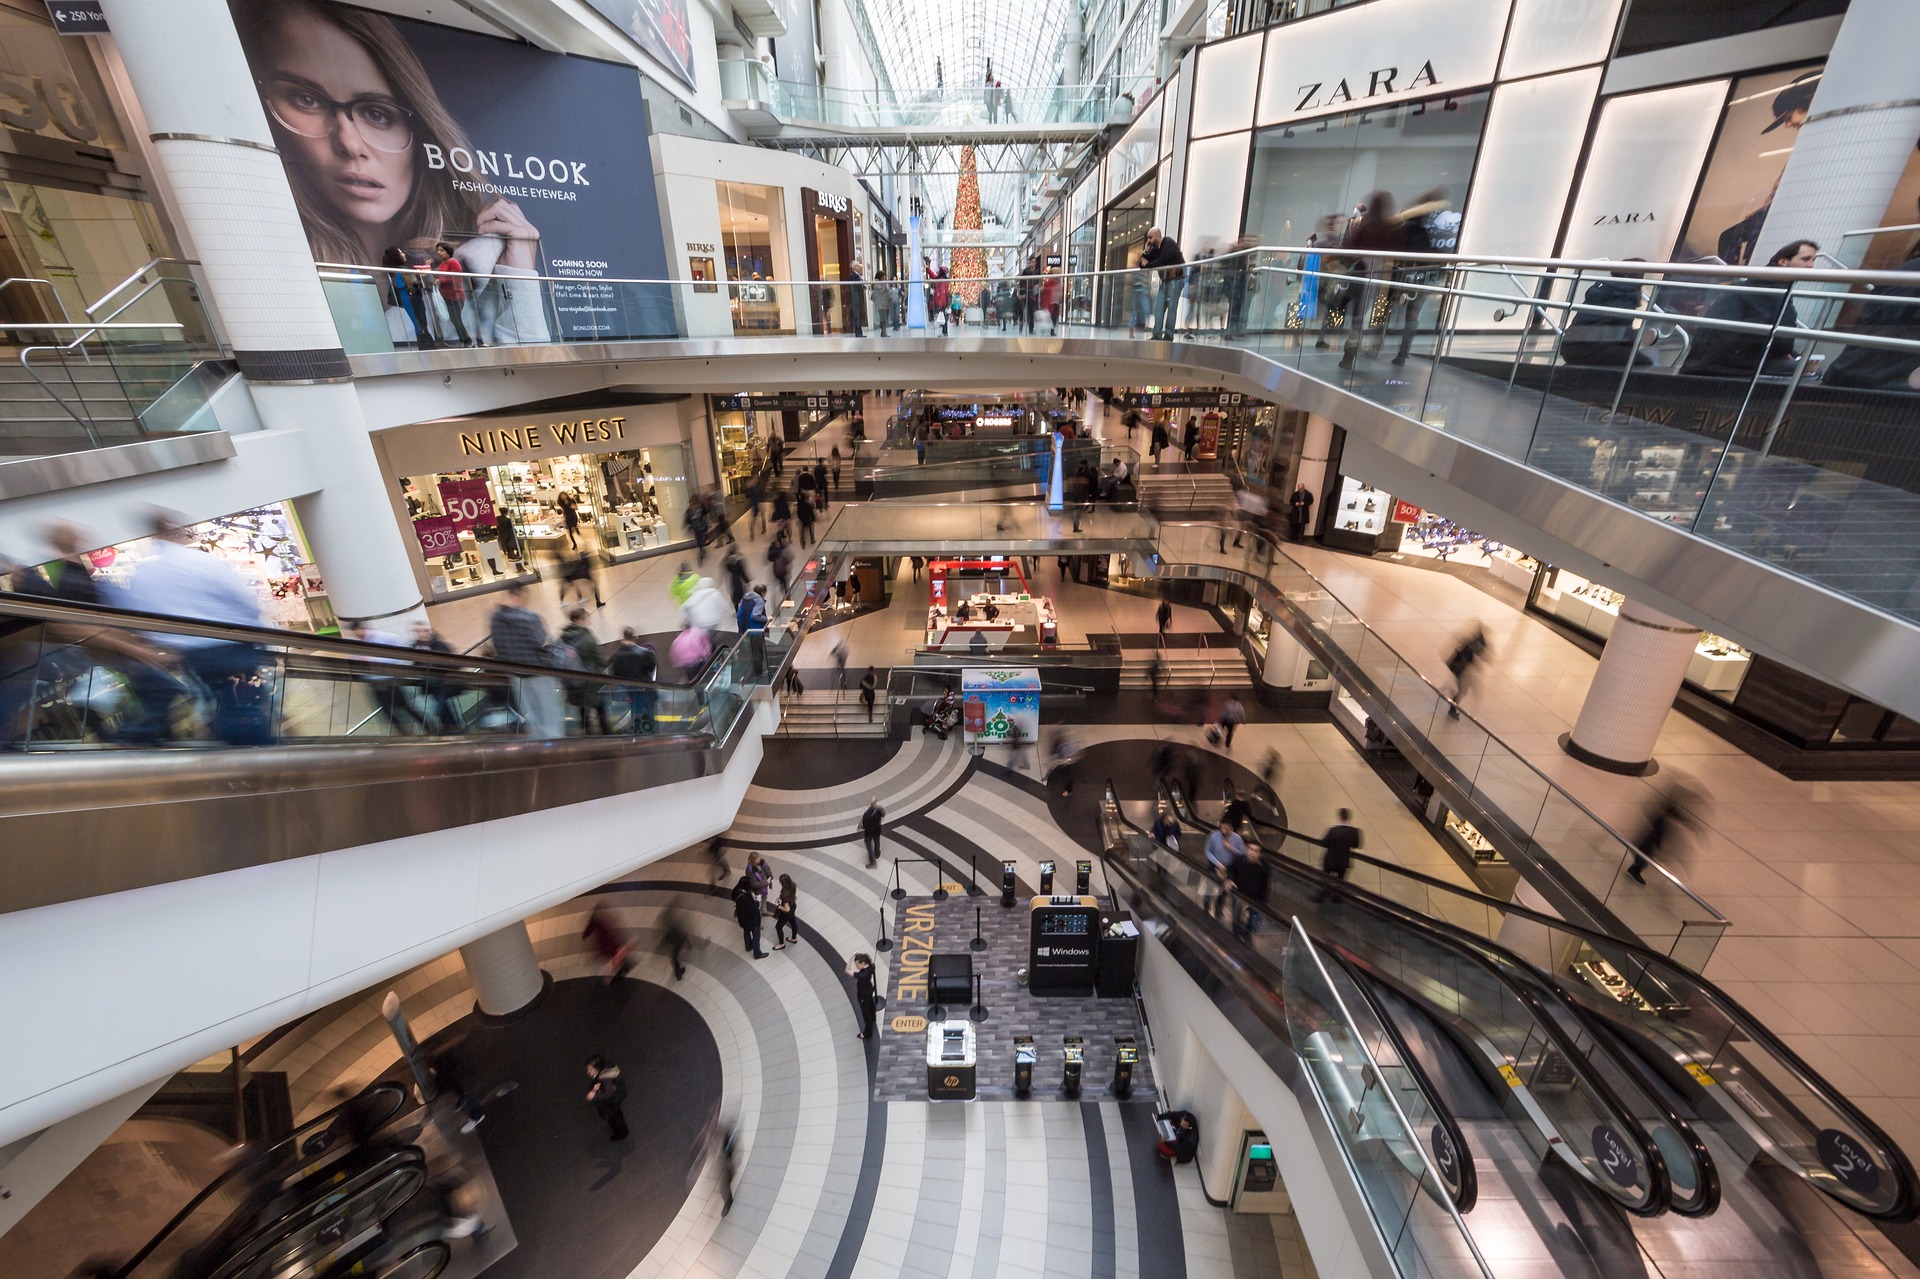 Create shopping experiences that stands out to draw customers back to retail malls